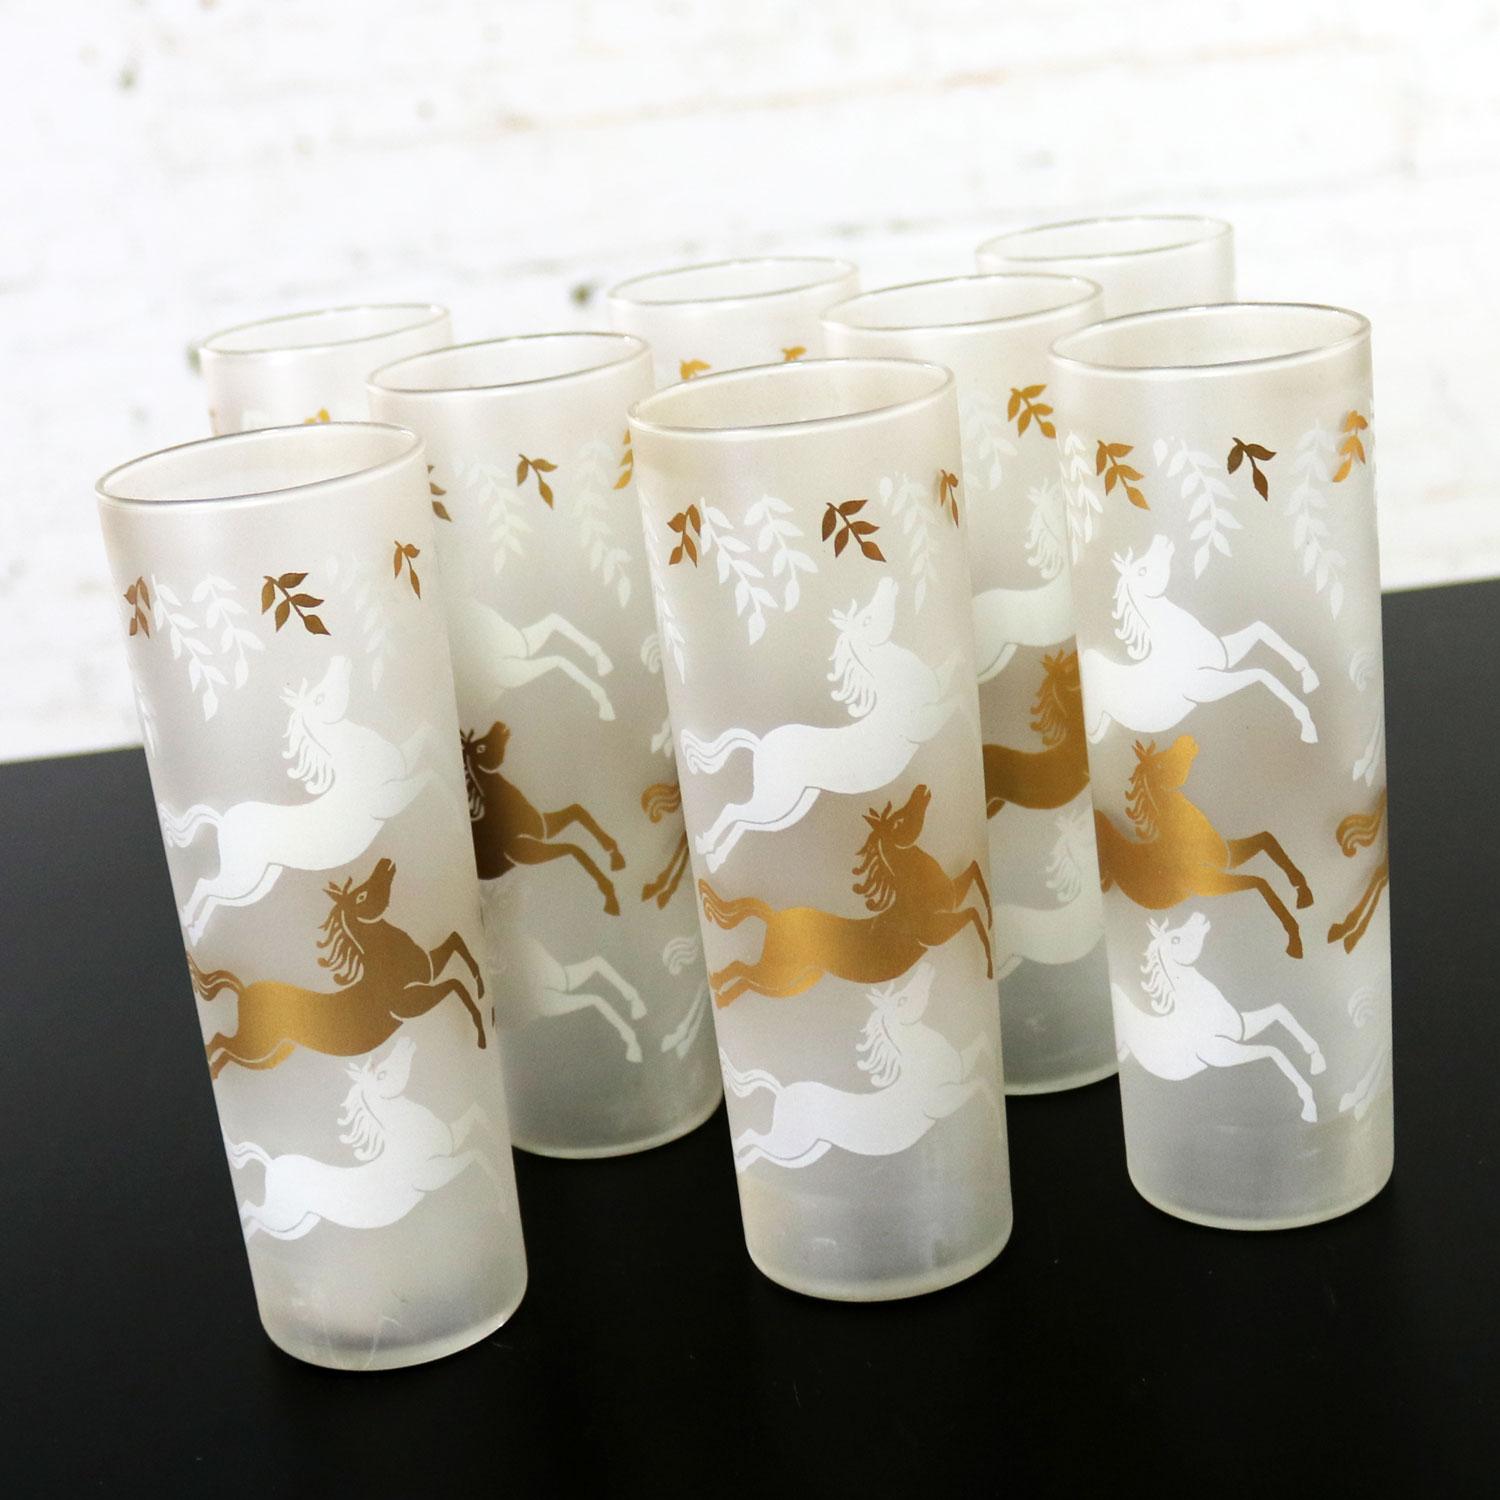 Incredible set of 8 Mid-Century Modern cocktail glasses by Libbey from their Cavalcade collection. They are frosted and featuring white and gold galloping horses in their original box. All highball glasses are in wonderful vintage condition with no